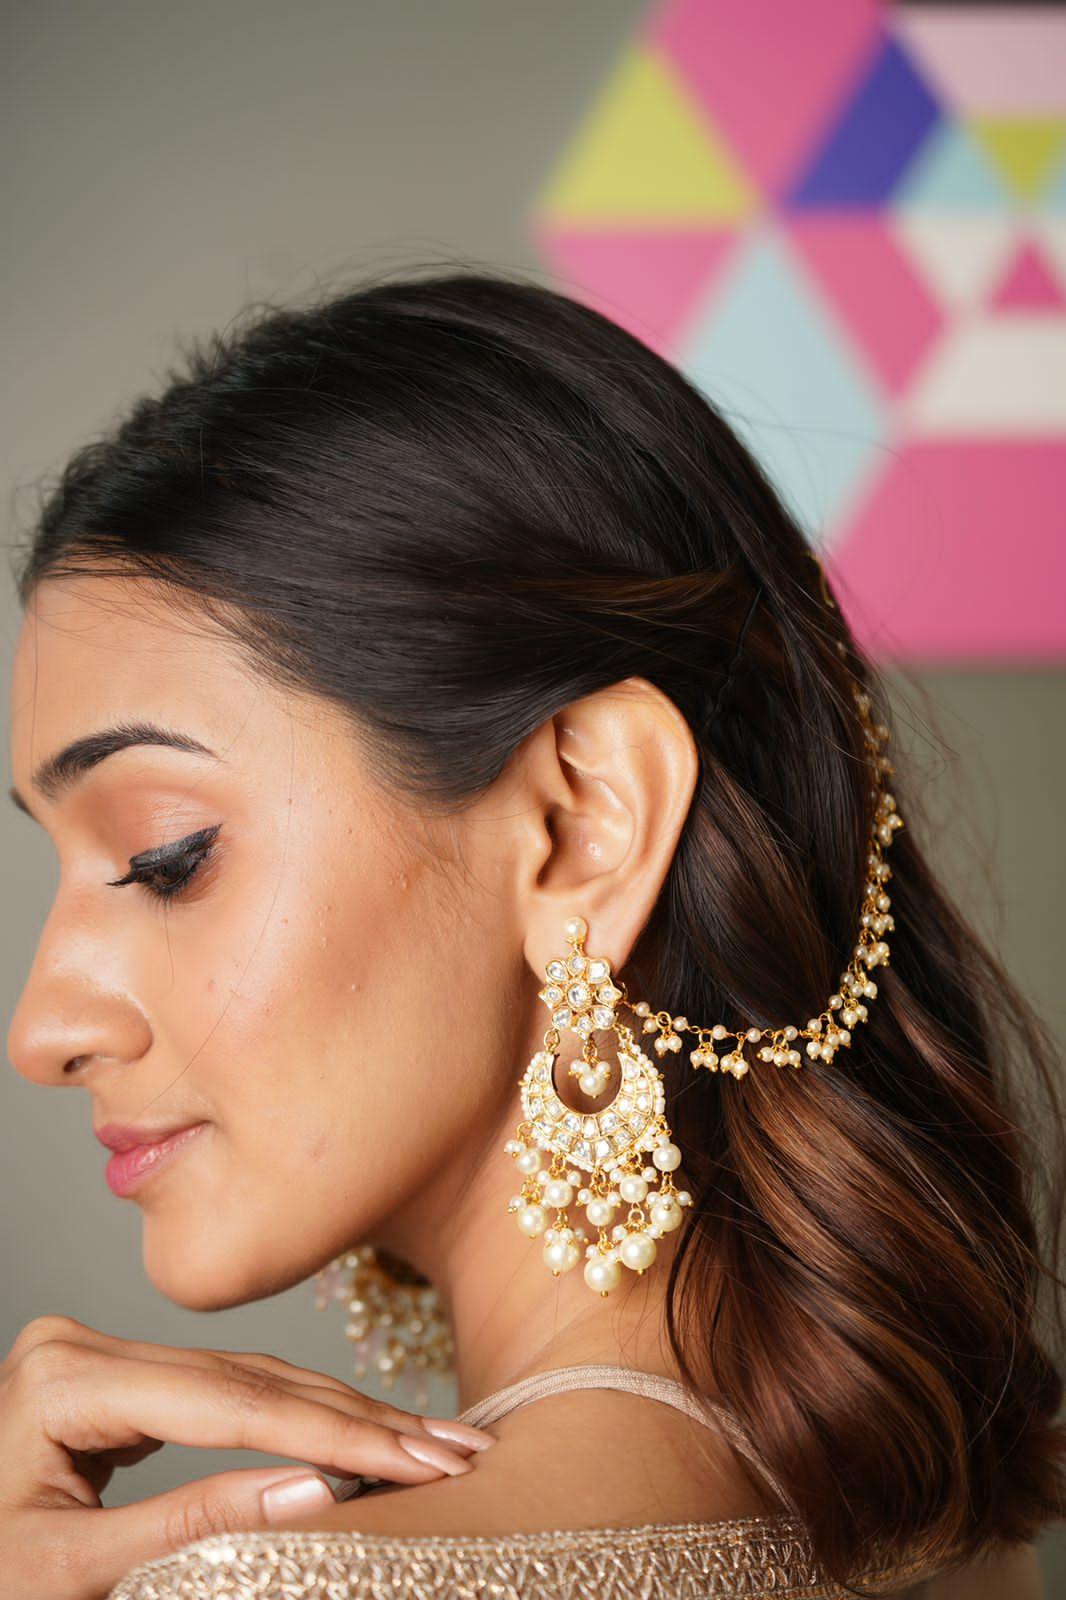 Know these tips to wear heavy earrings